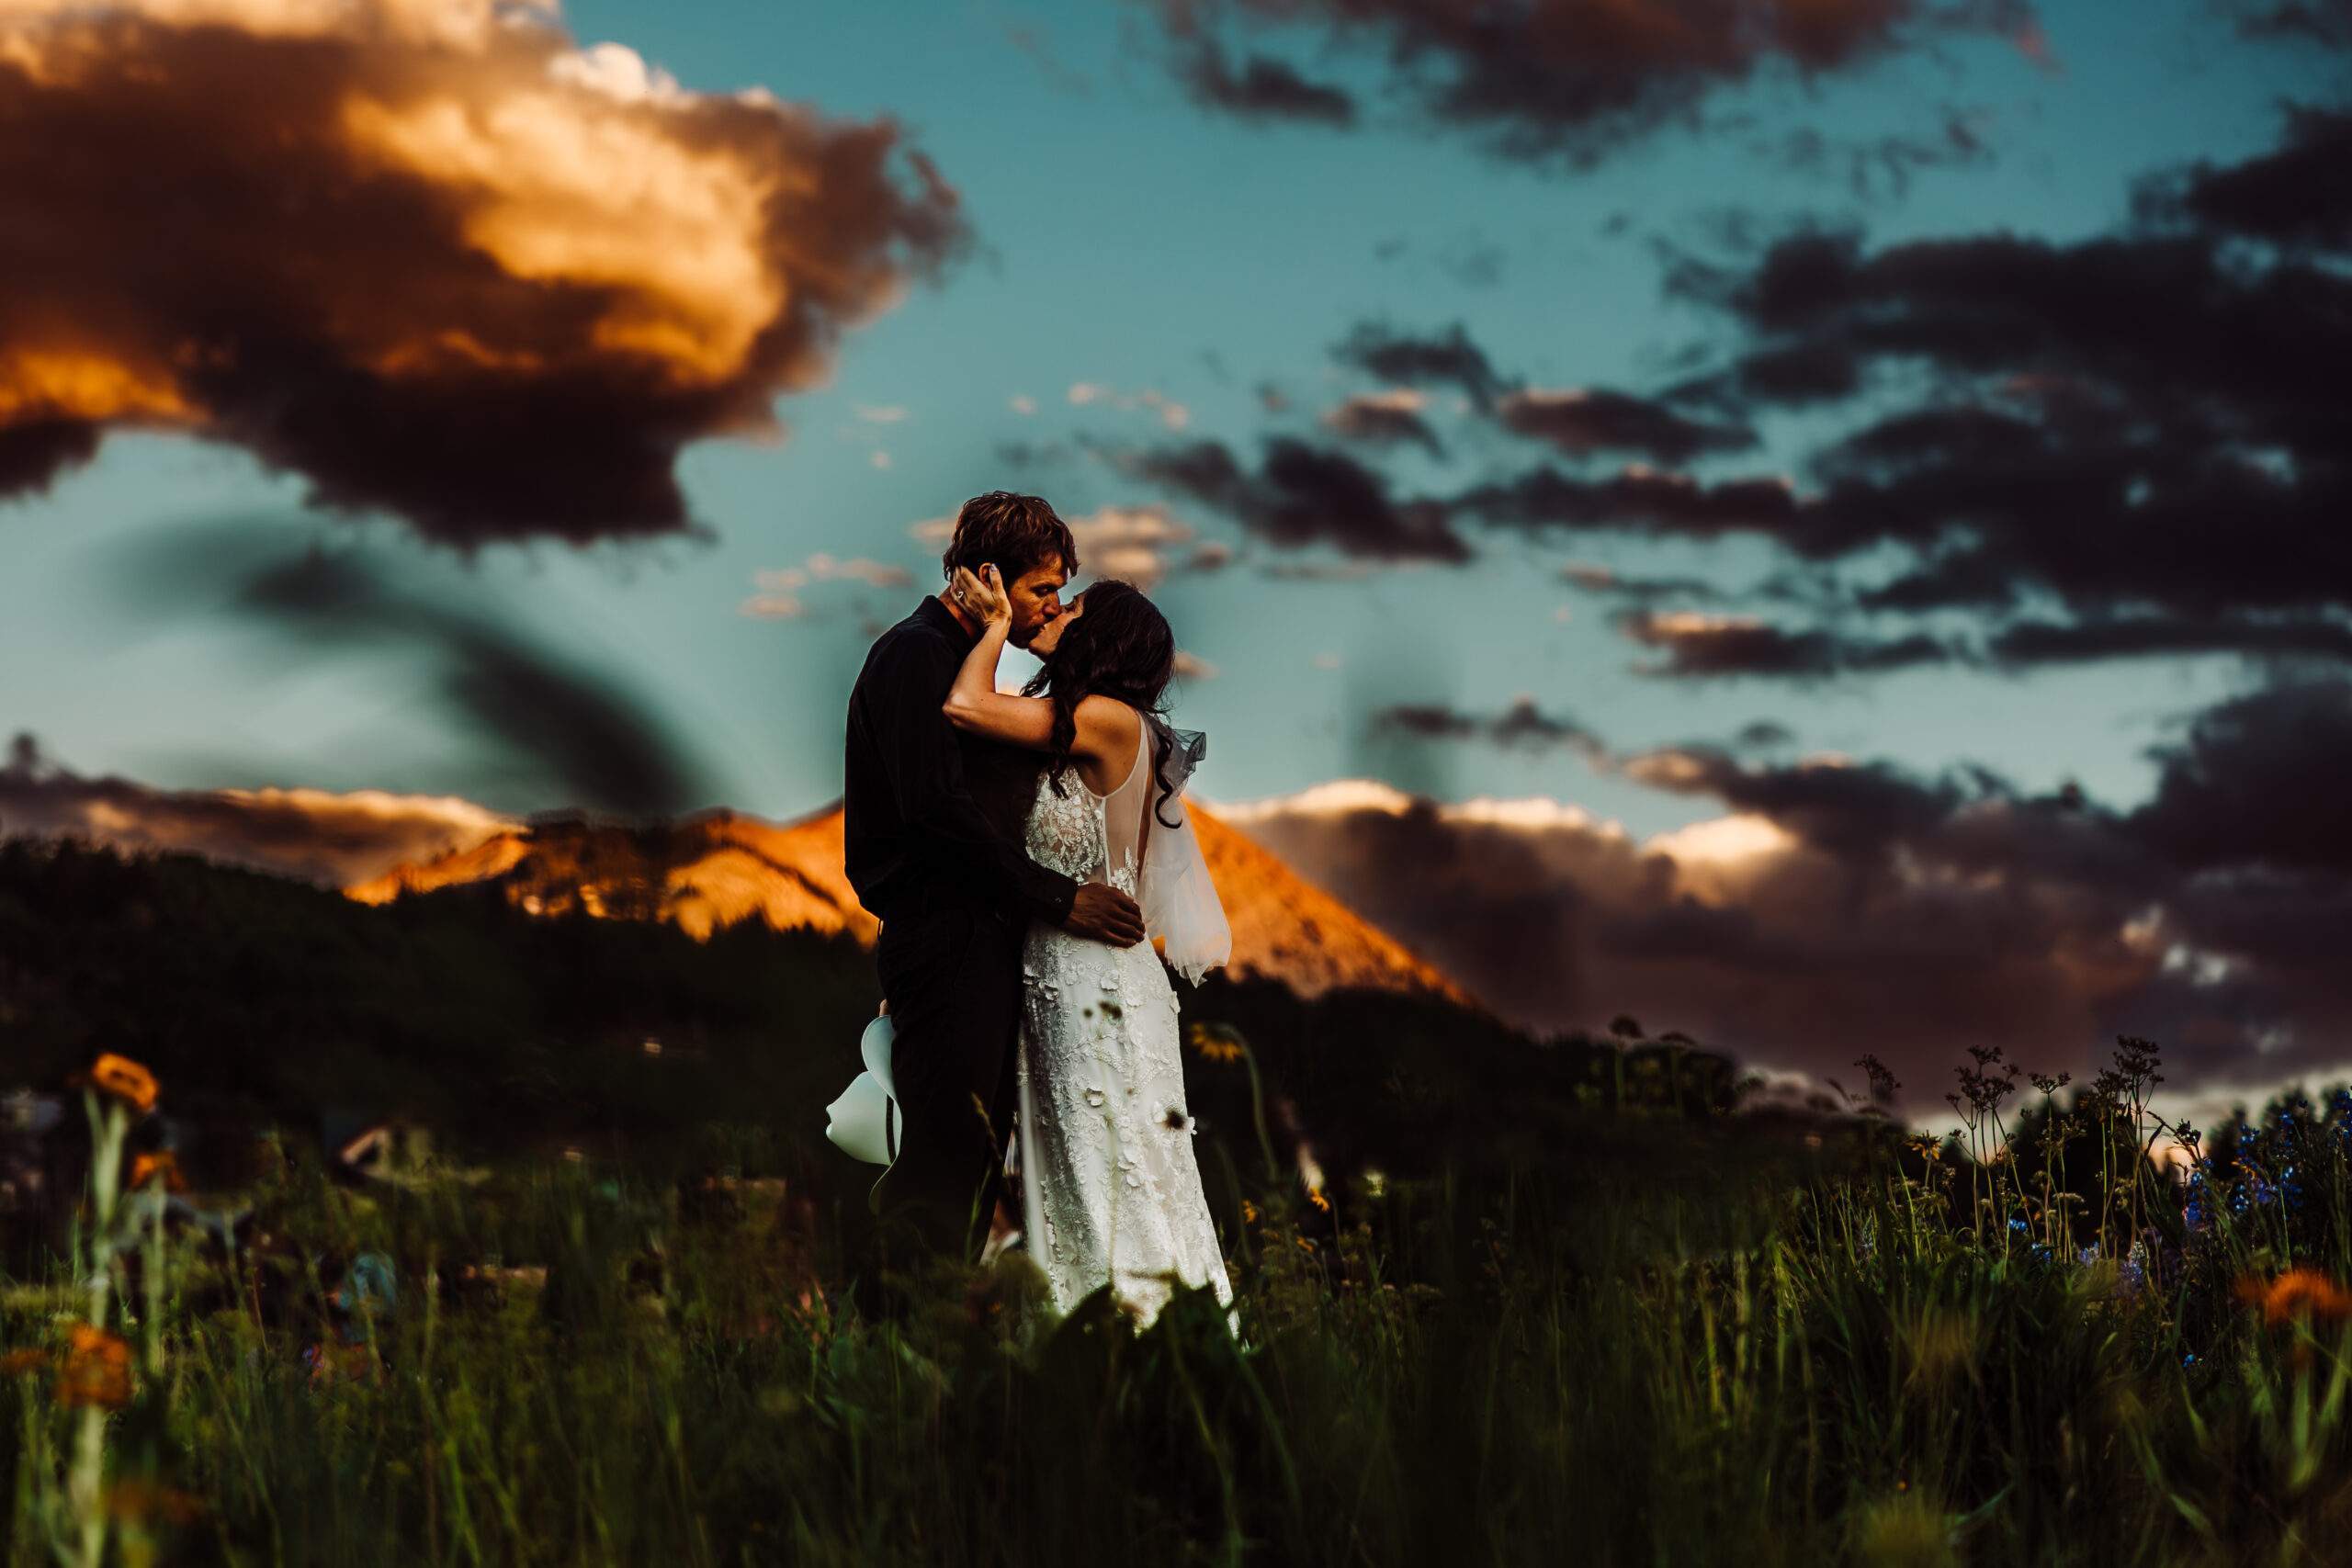 Colorado Elopement Photographer | Pictured is in elopement at a golf course outside of Beaver Creek, Colorado. The couple and their immediate families are all standing on the golf course, which overlooks a huge valley. It was a windy day so the bride's veil was flailing about. At this moment, the bride's sister is adjusting the bride's veil. 